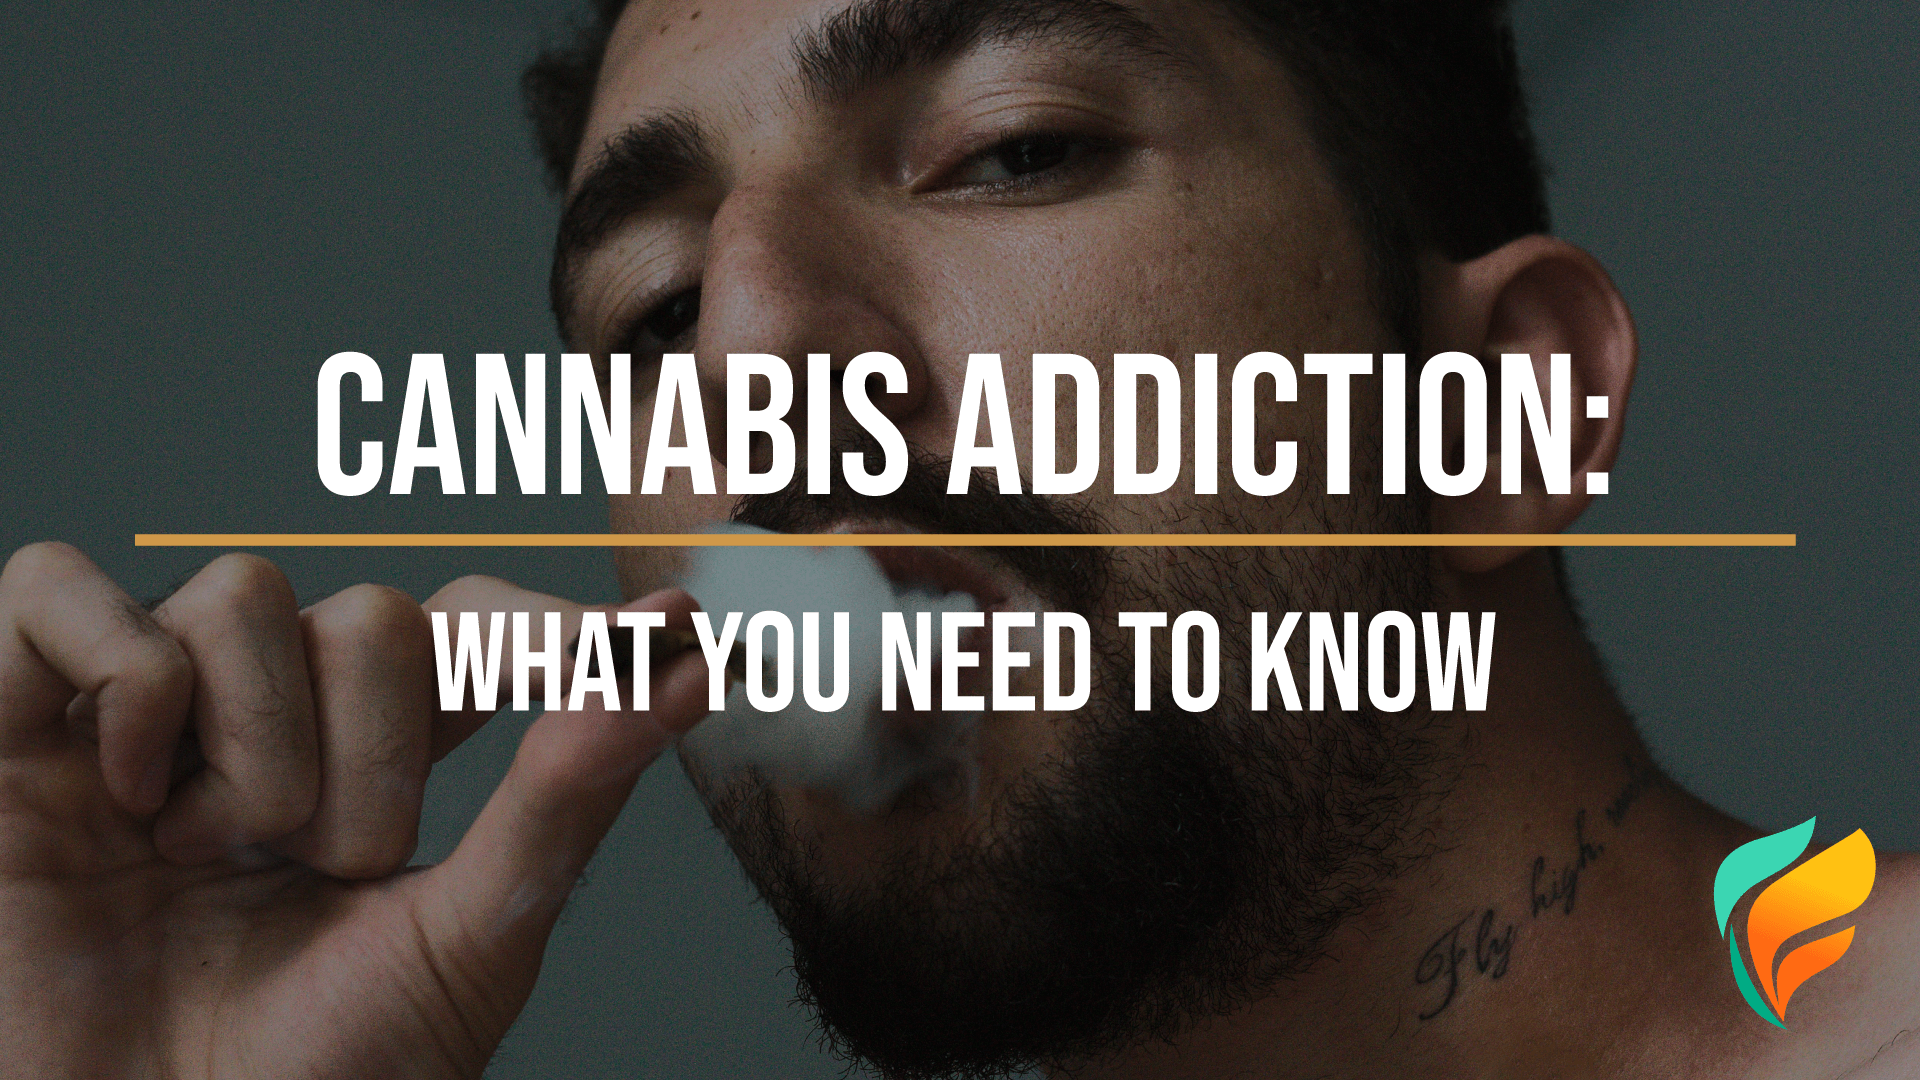 Cannabis Addiction: Facts & More